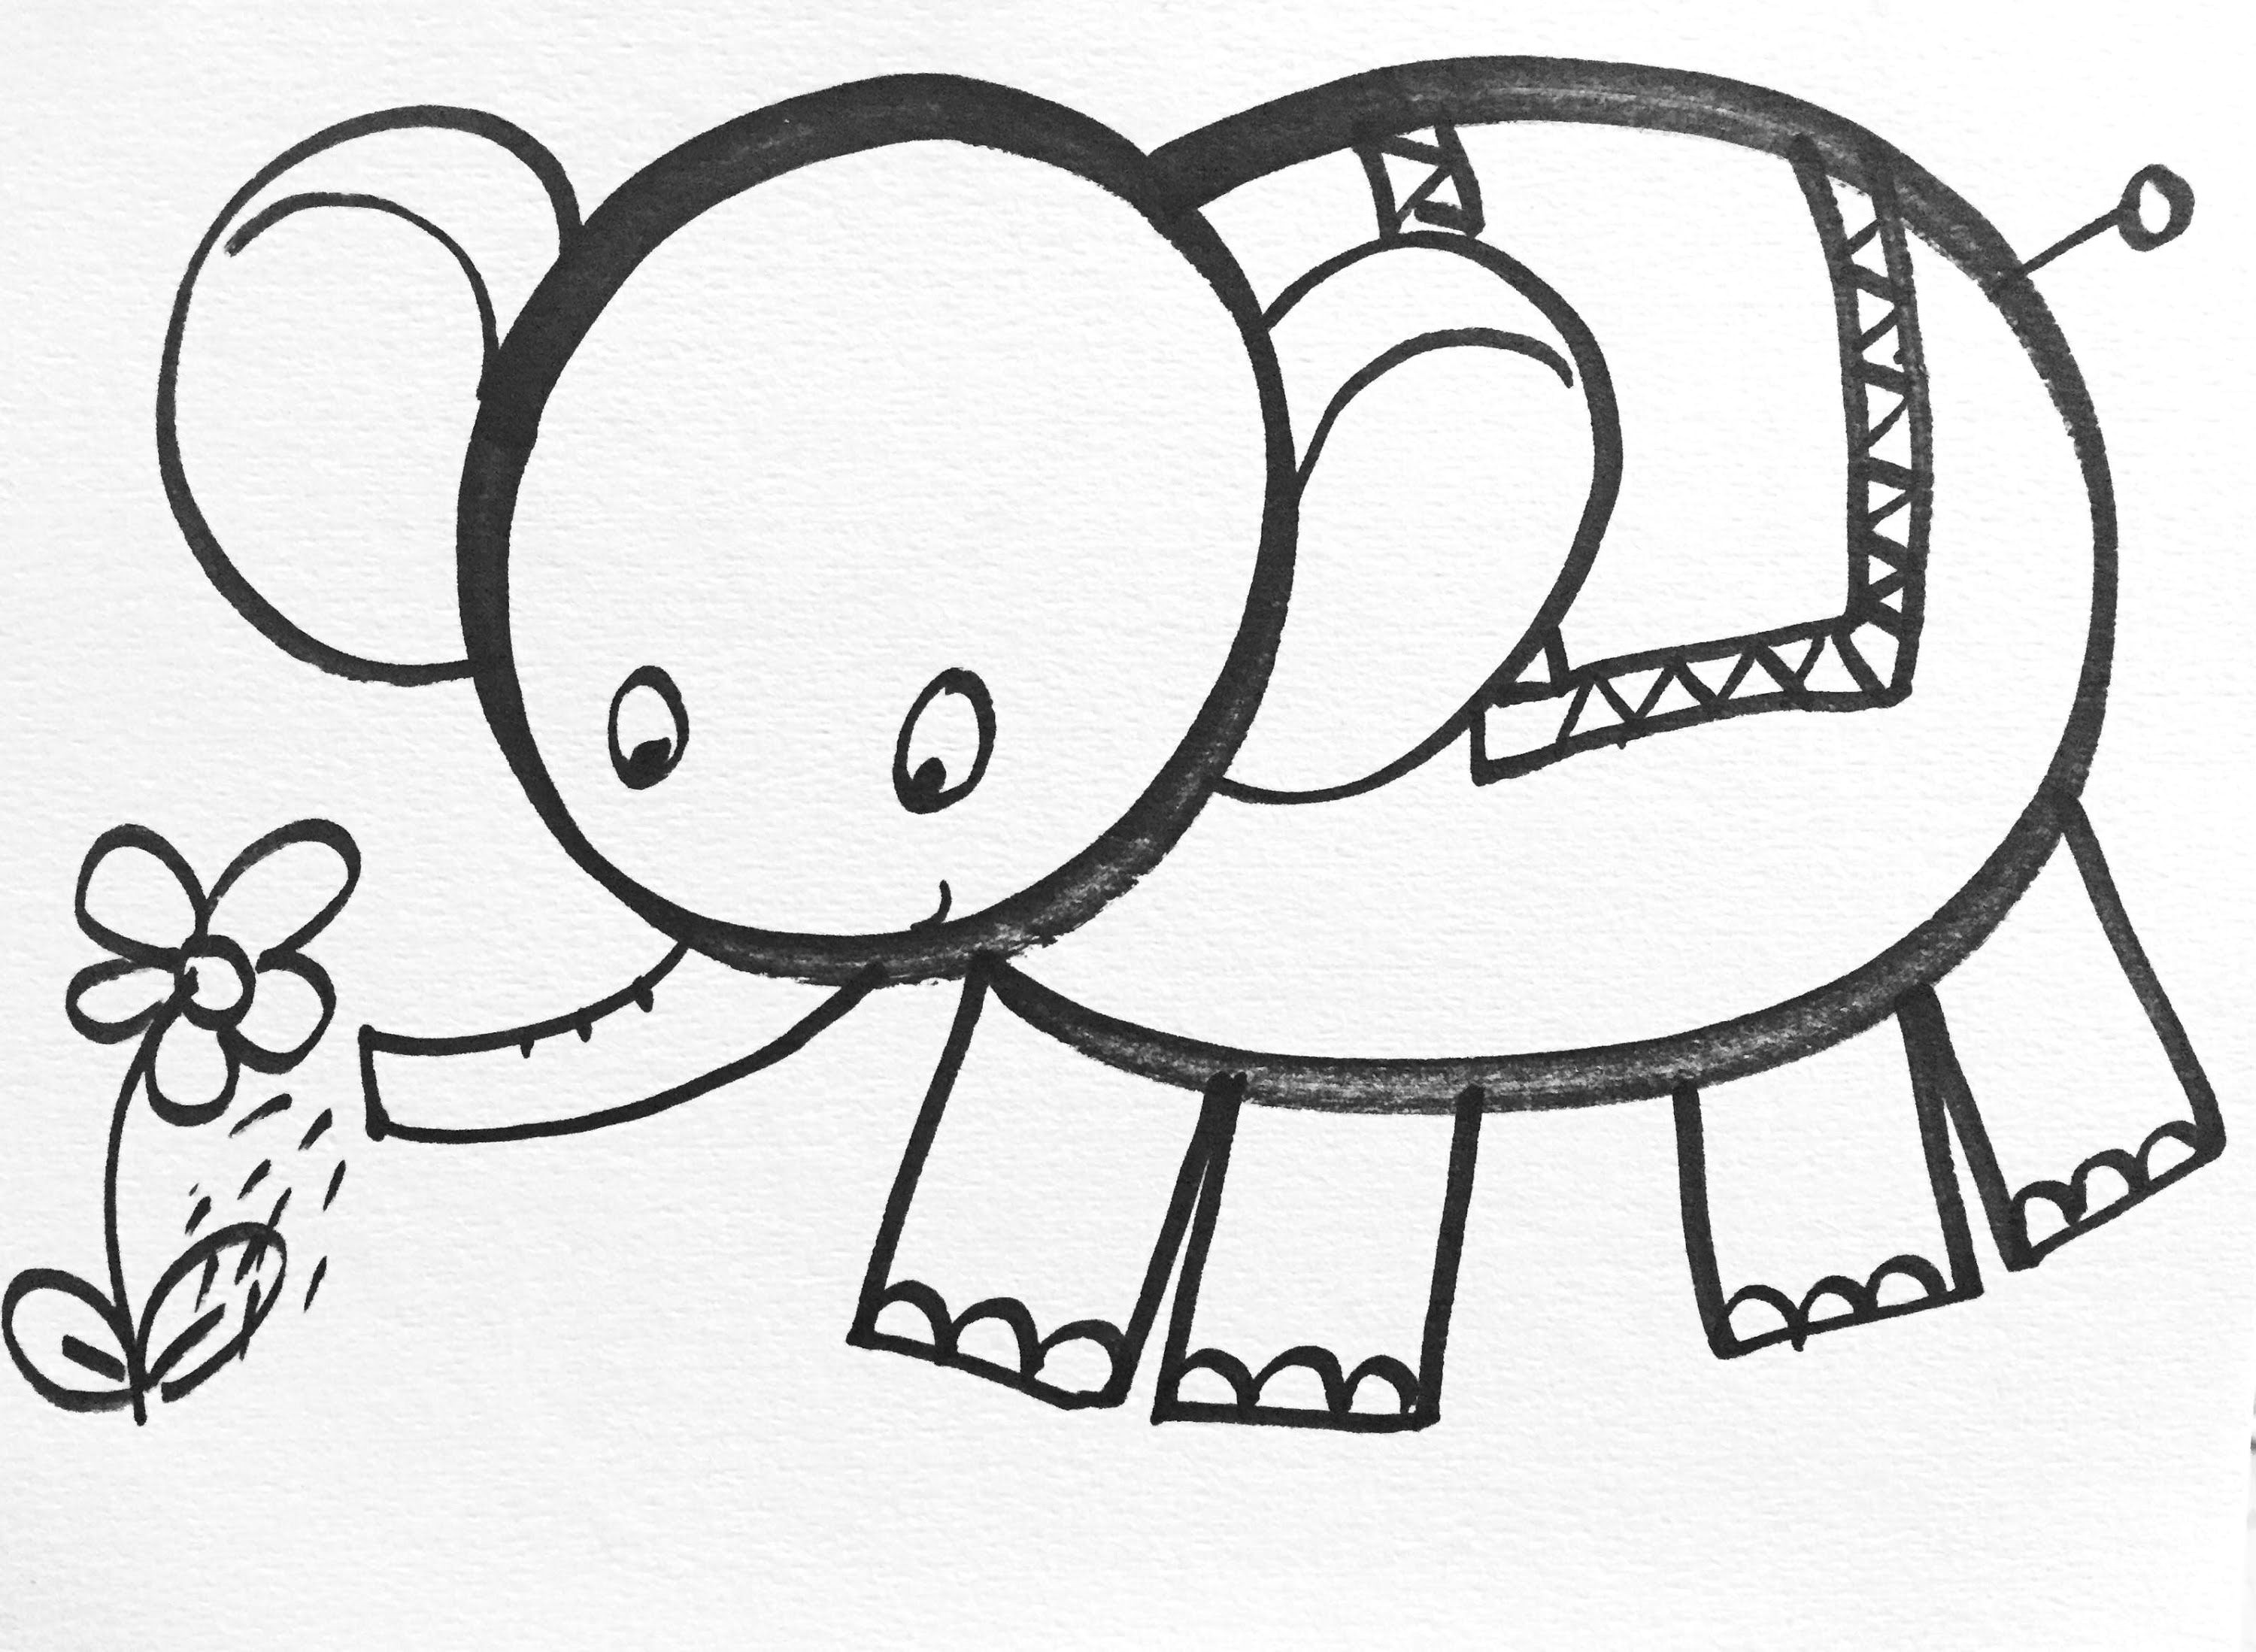 Cute Drawings Easy Elephant Learn How to Draw Easy In This Drawing You Can Learn to Draw the